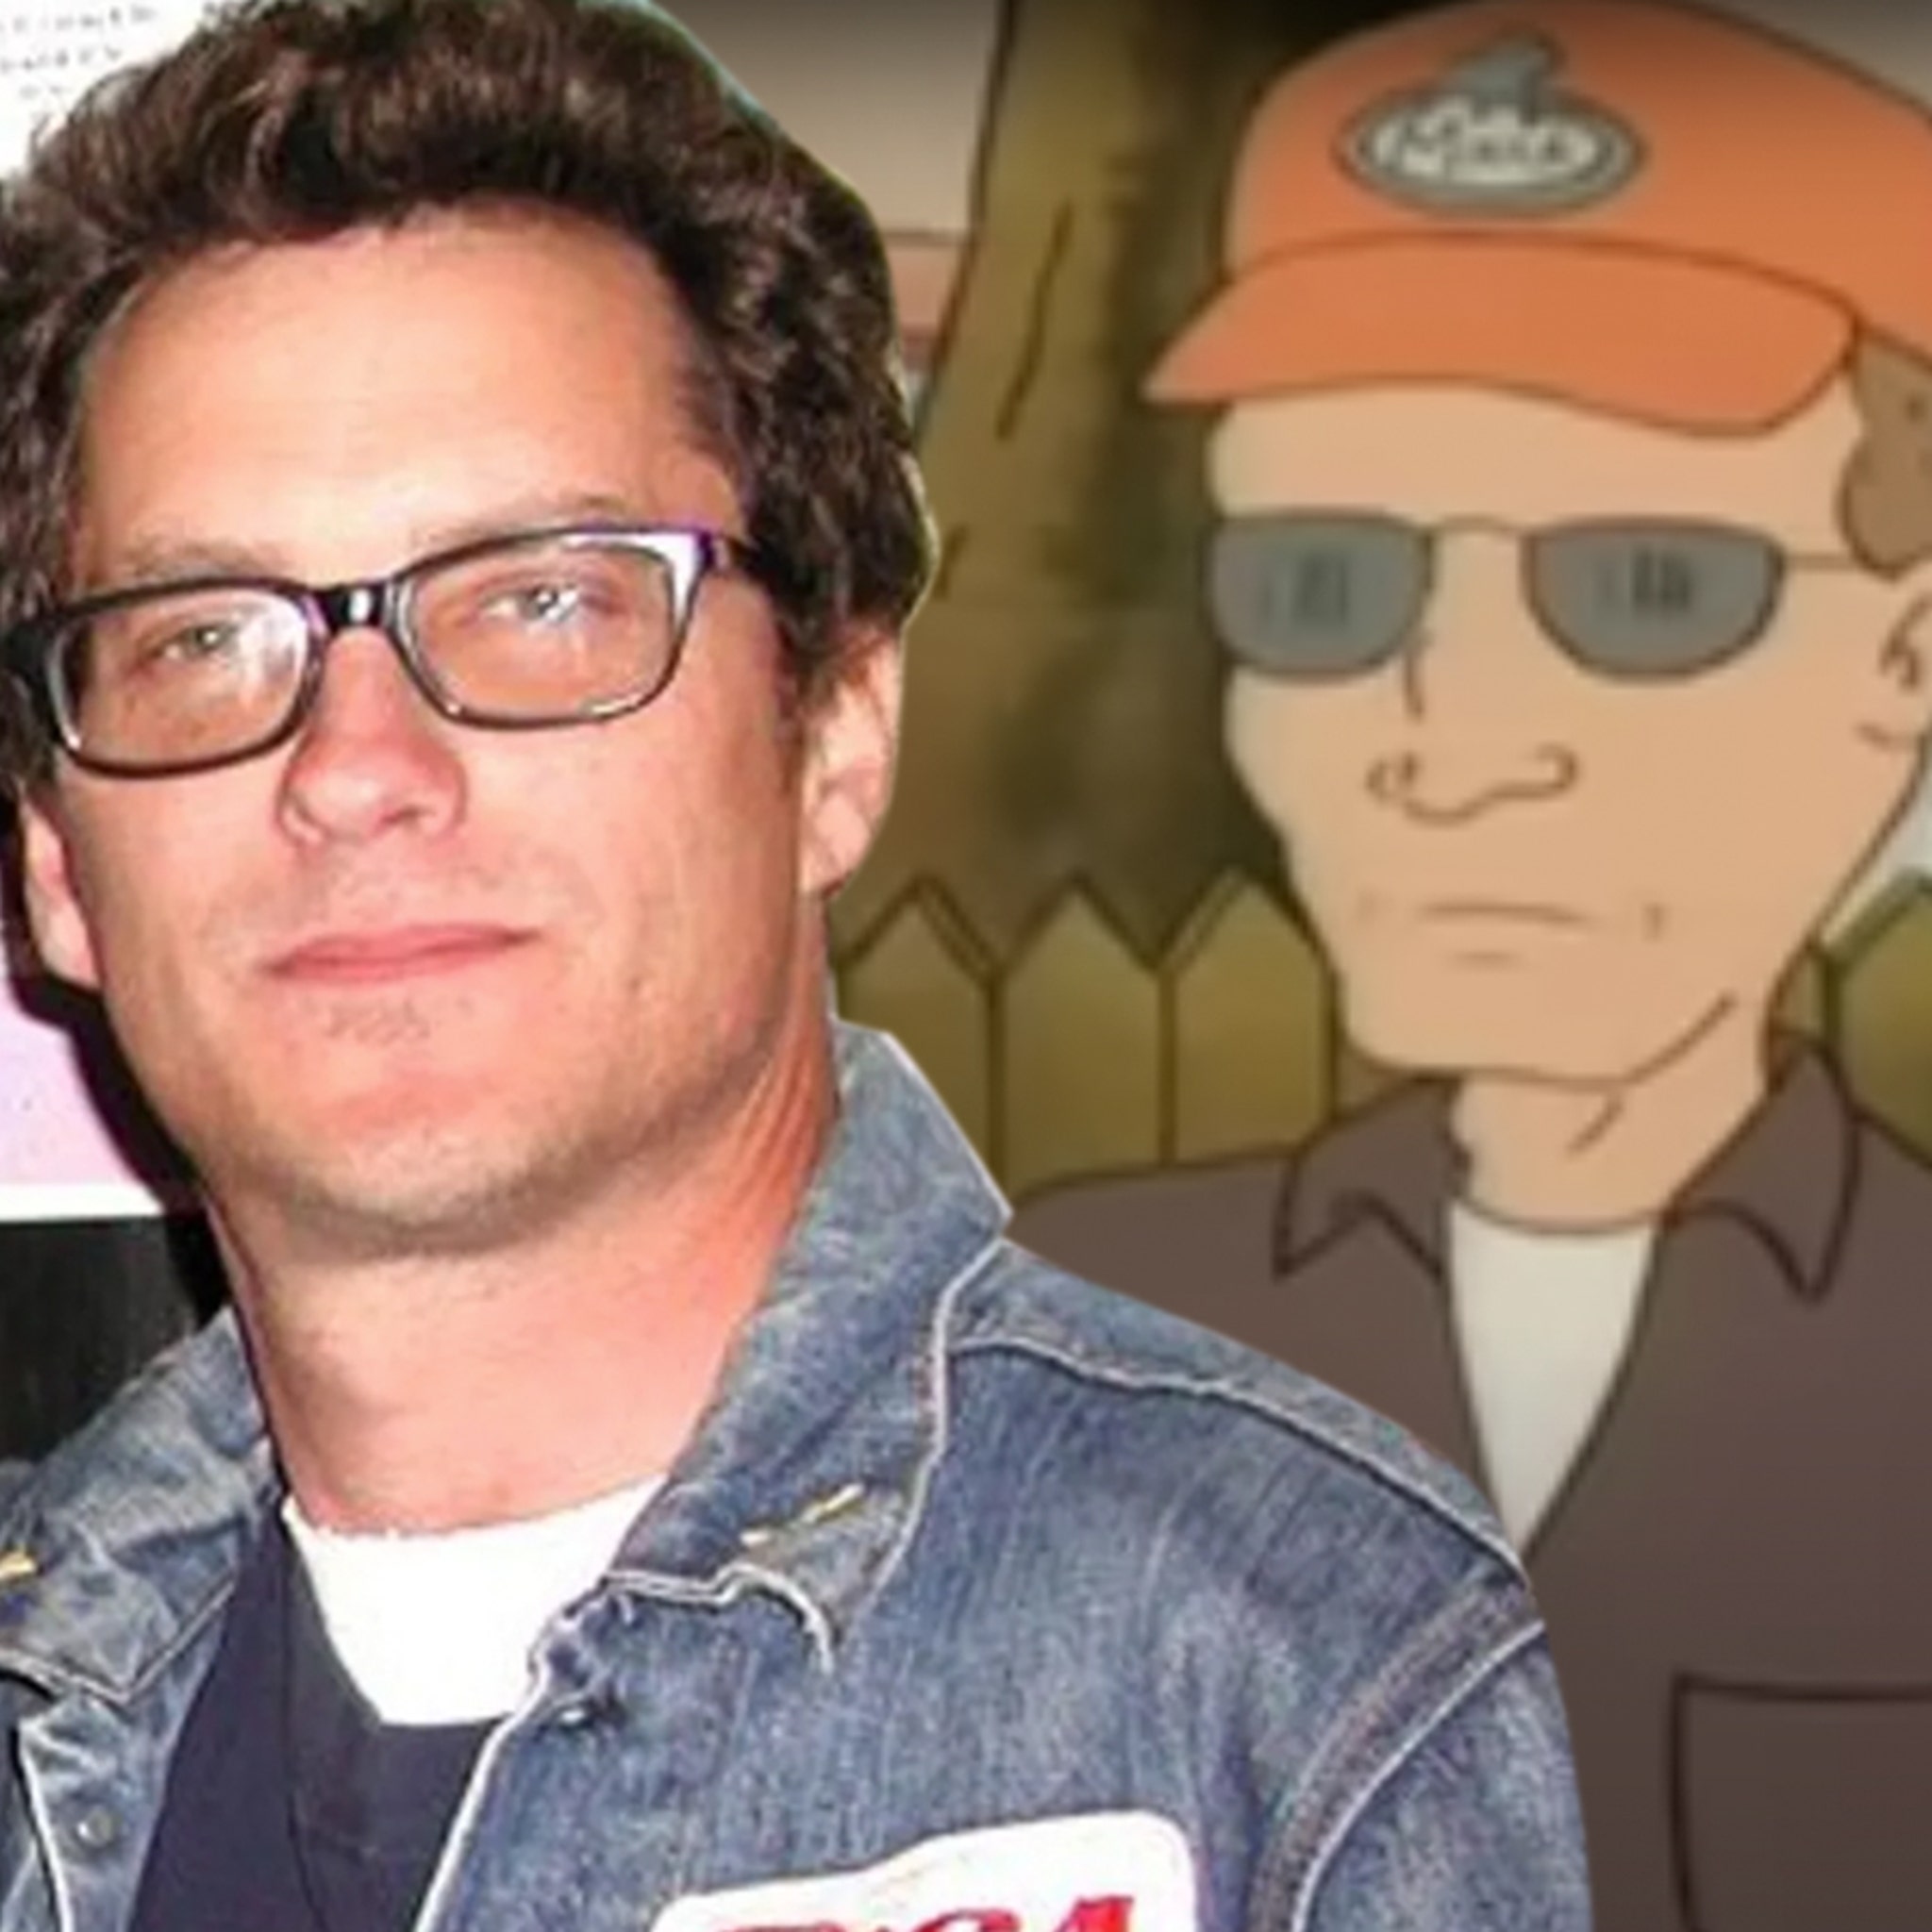 Johnny Hardwick Recorded King of the Hill Reboot Episodes Before Death –  TVLine